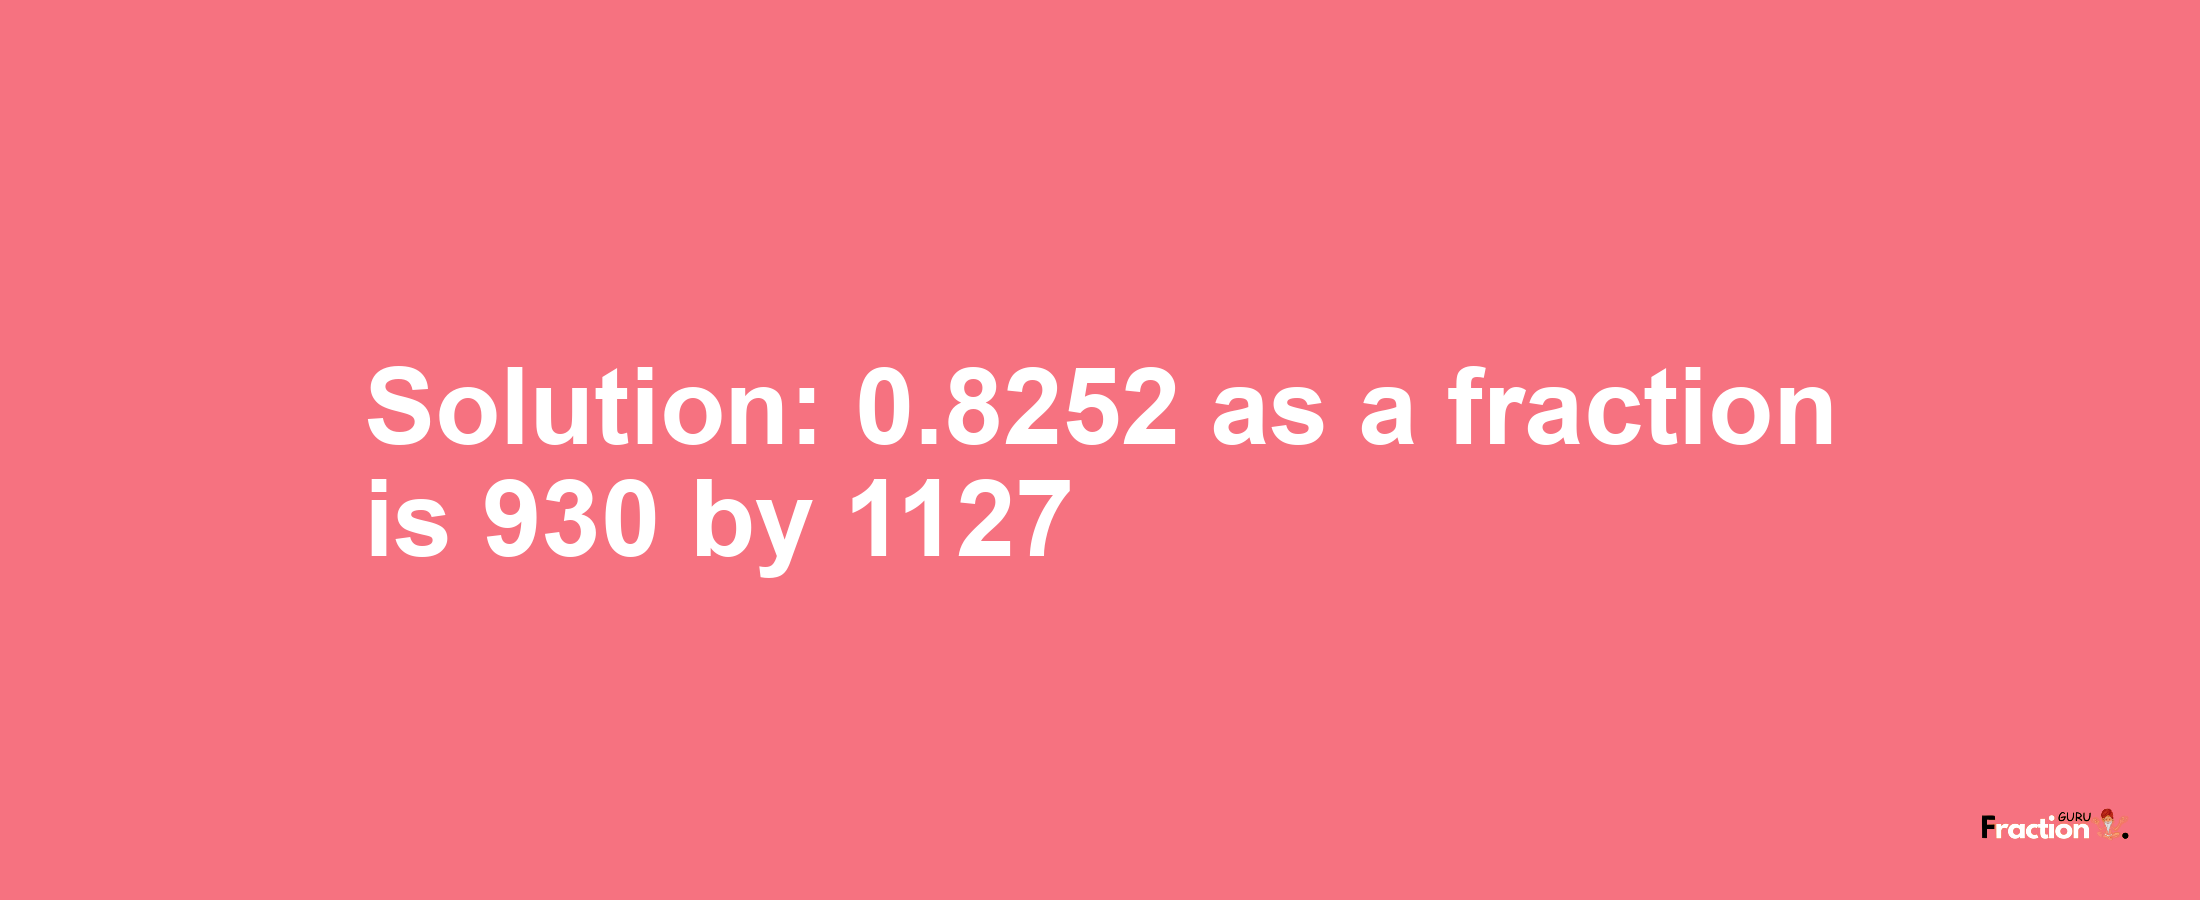 Solution:0.8252 as a fraction is 930/1127